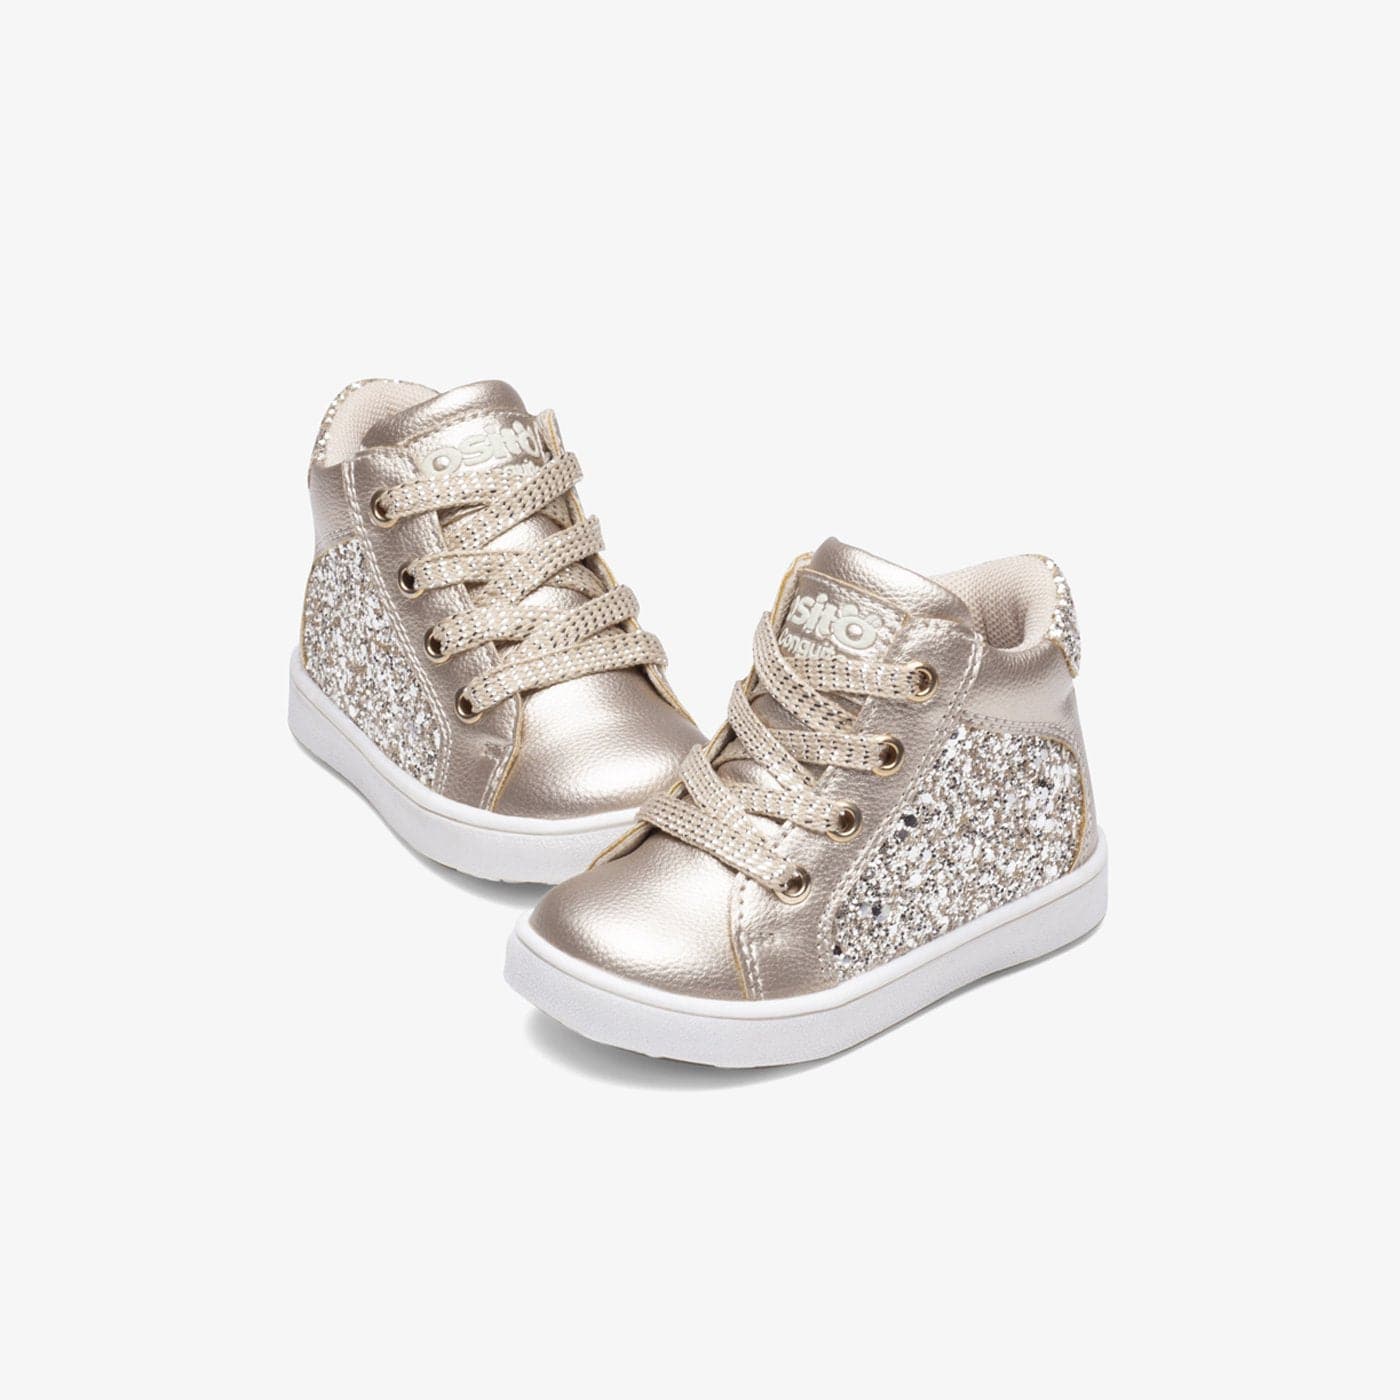 OSITO Shoes Baby's Platinum Glitter Boots